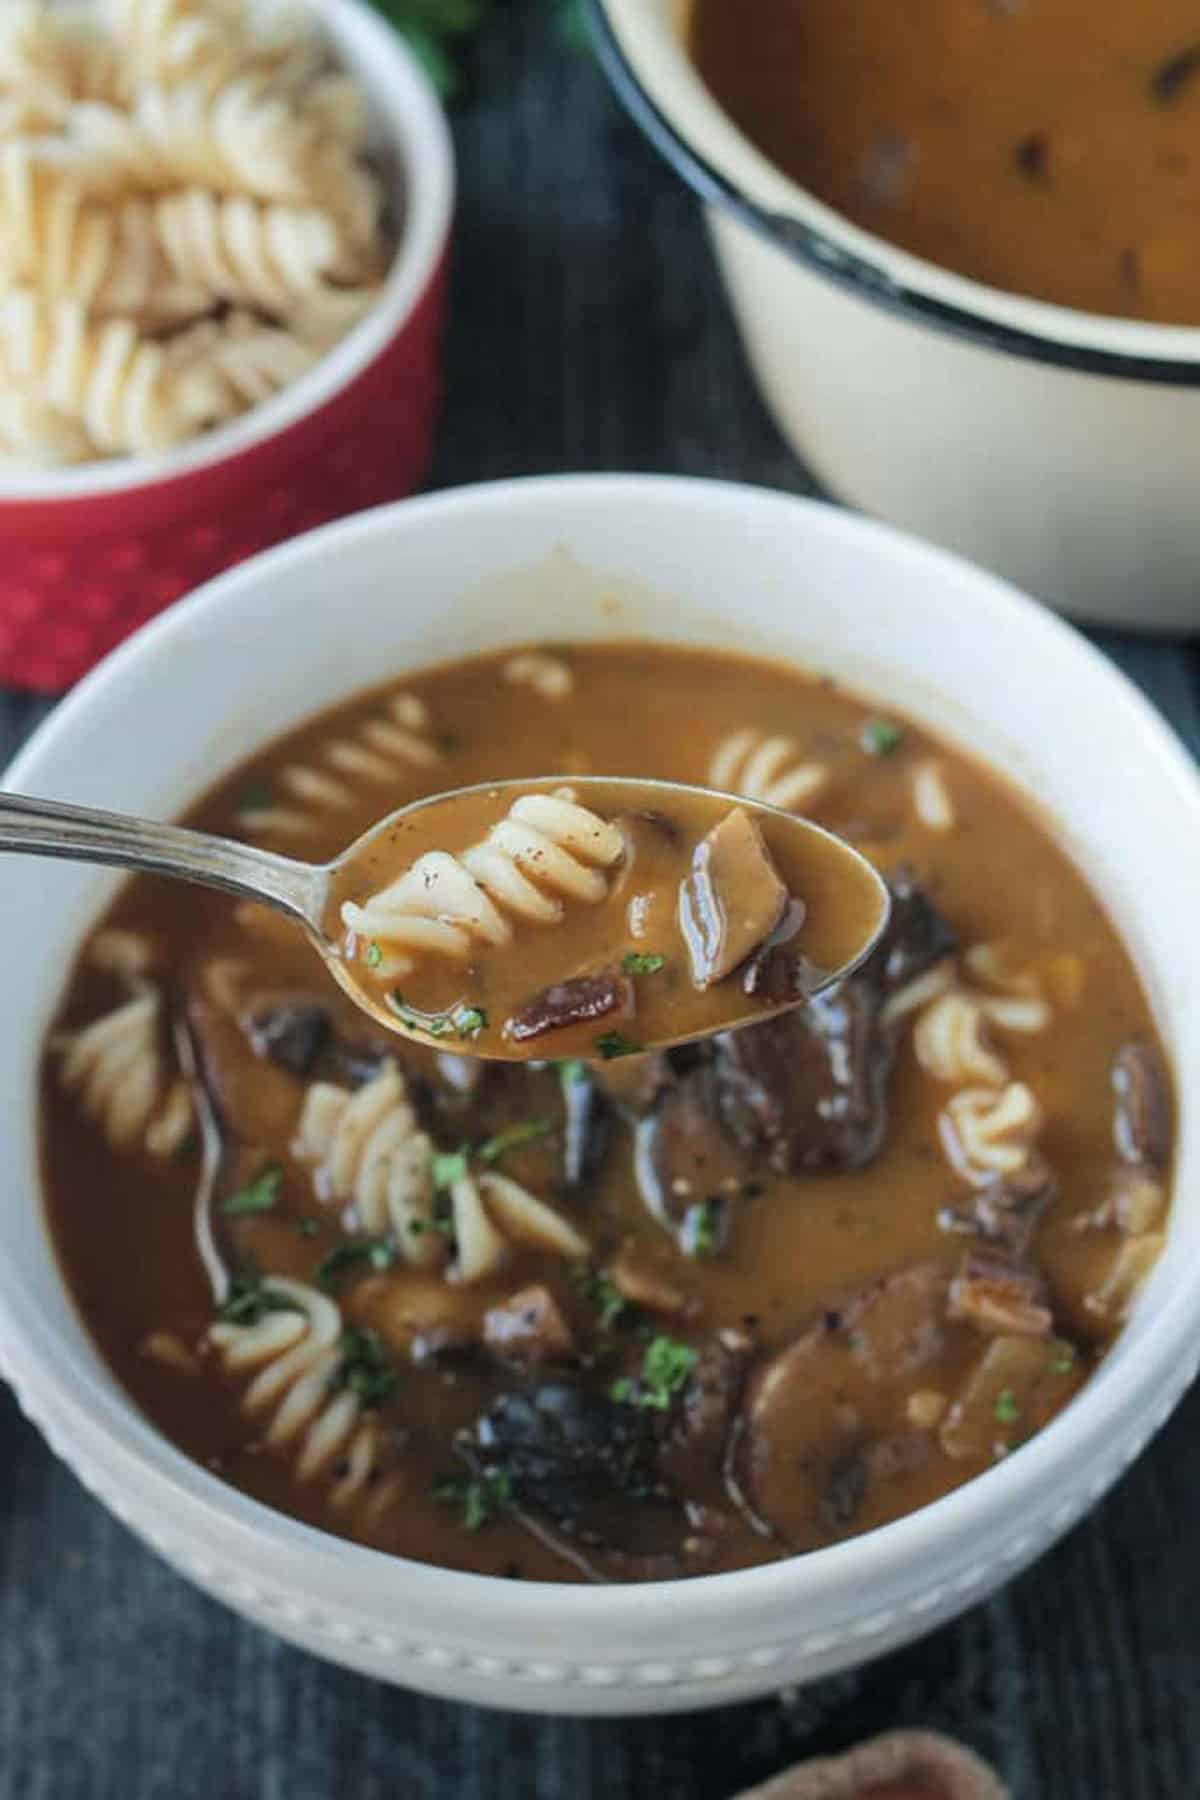 Close up of a sliced mushroom and rotini noodle on a spoon with broth.